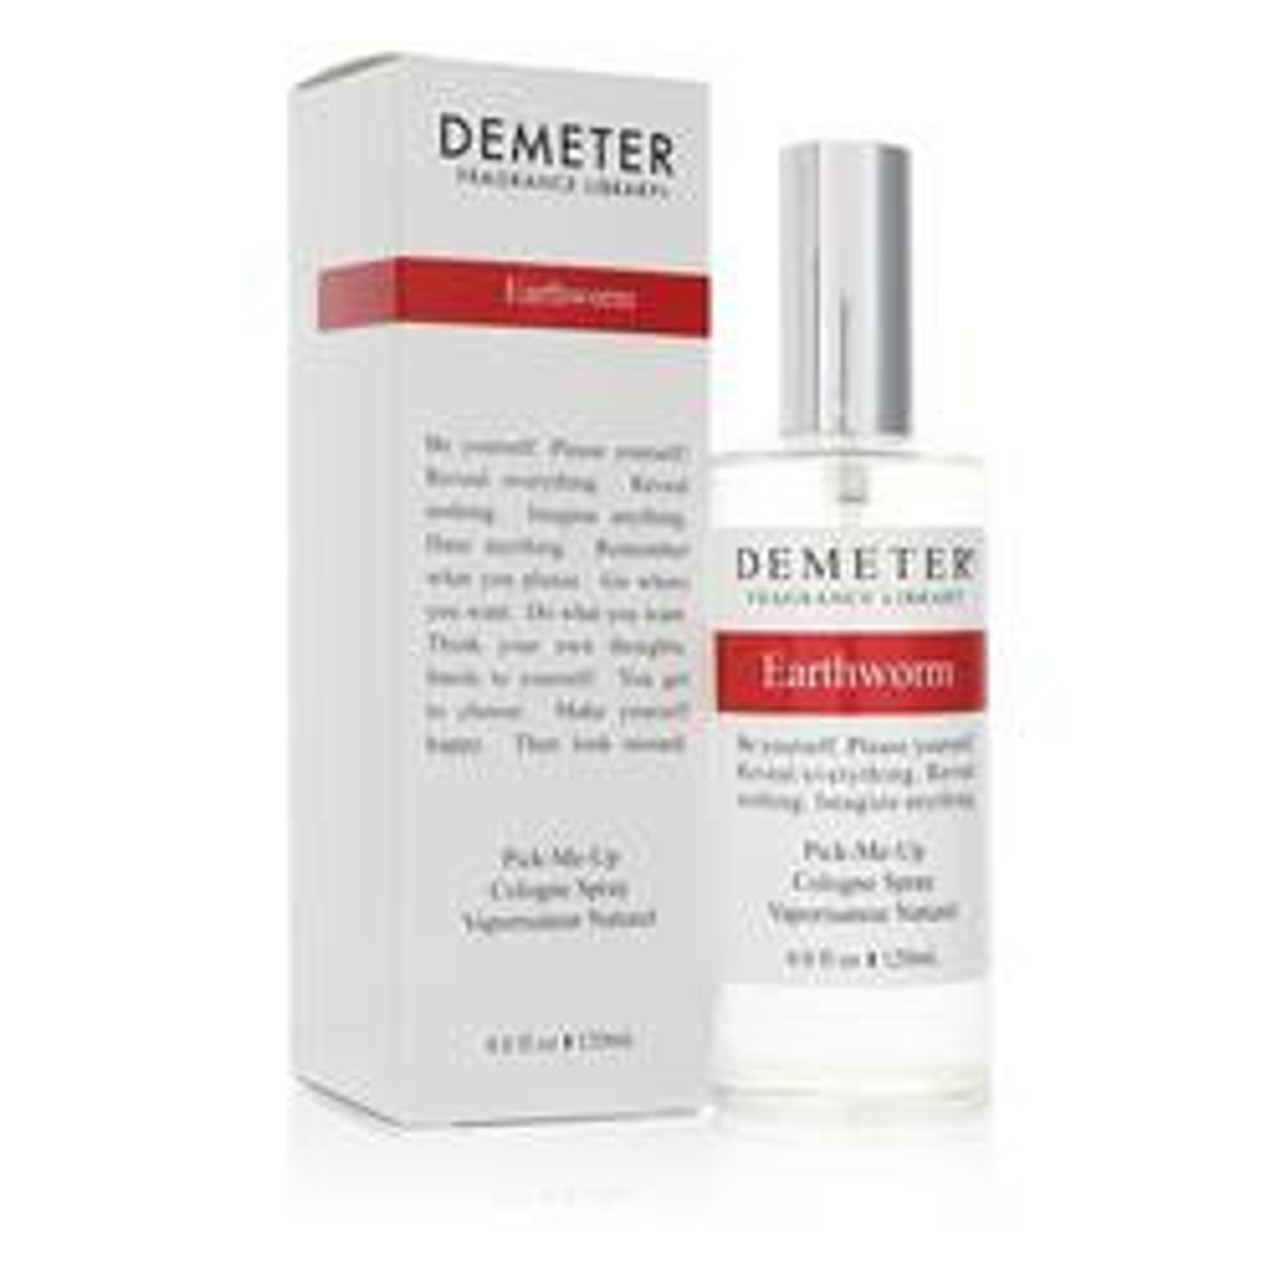 Demeter Earthworm Perfume By Demeter Cologne Spray (Unisex) 4 oz for Women - [From 79.50 - Choose pk Qty ] - *Ships from Miami